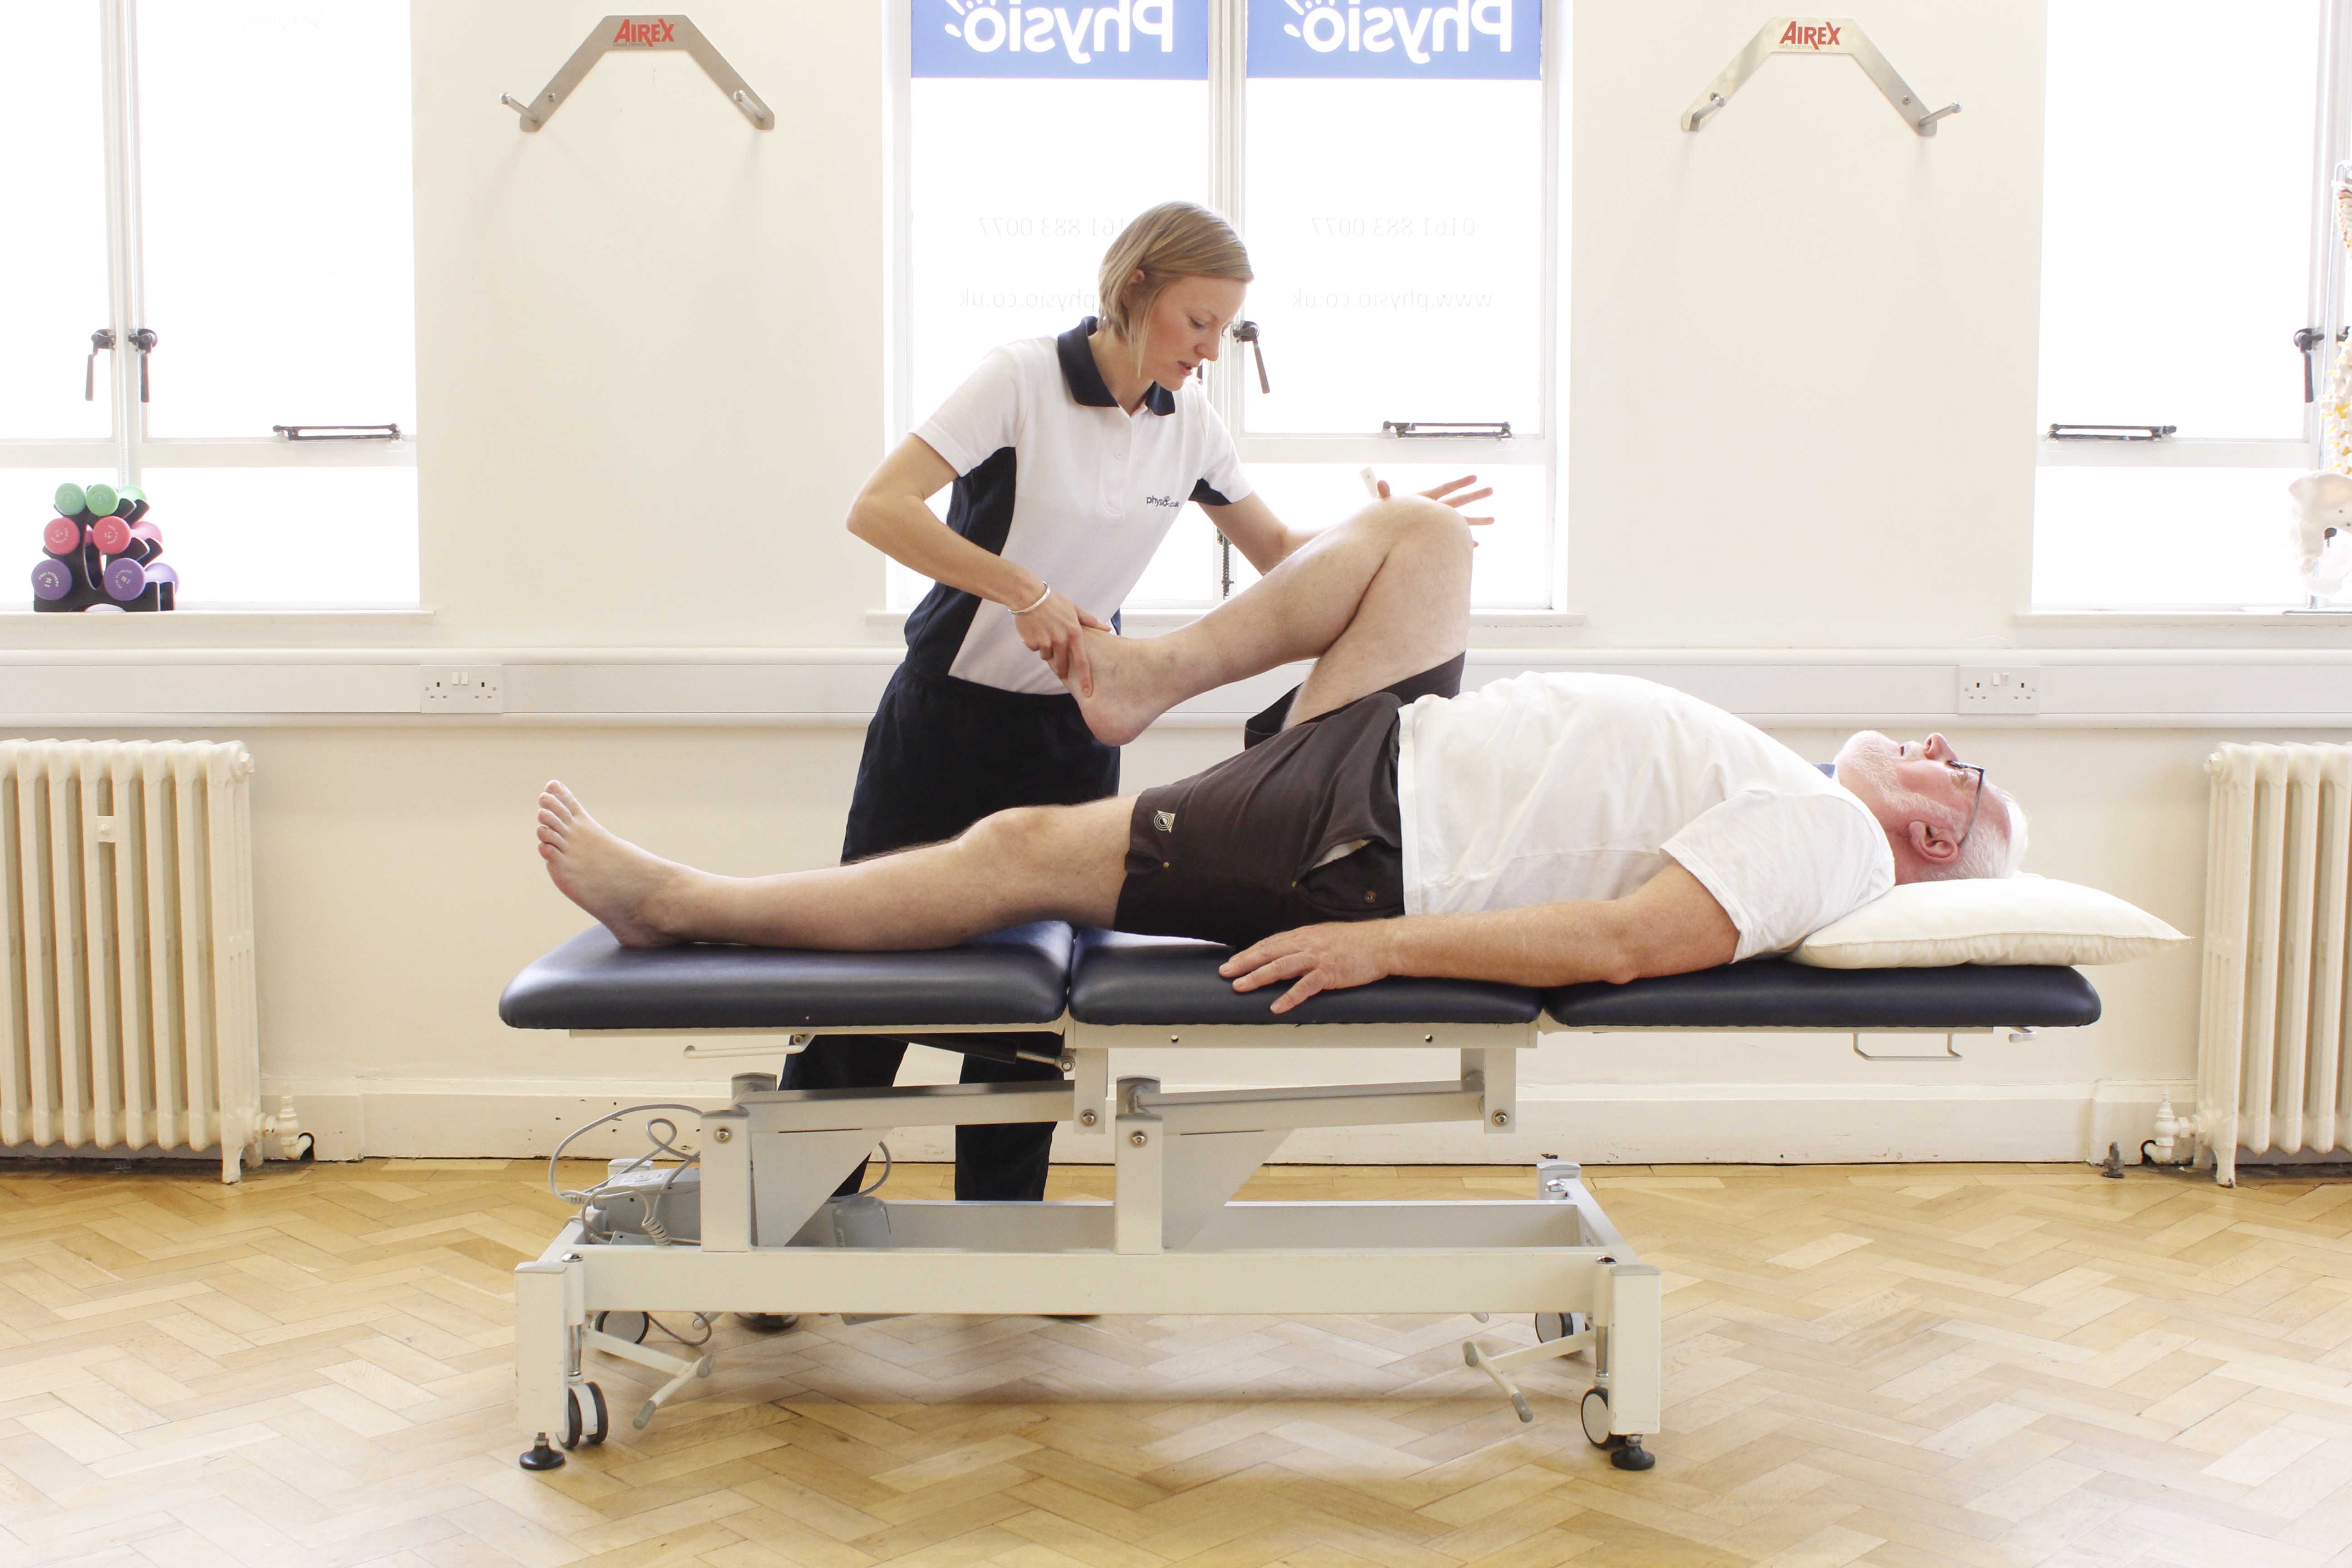 mobilisation and stretch exercises to the hip, knee and ankle applied by a specialist physiotherapist